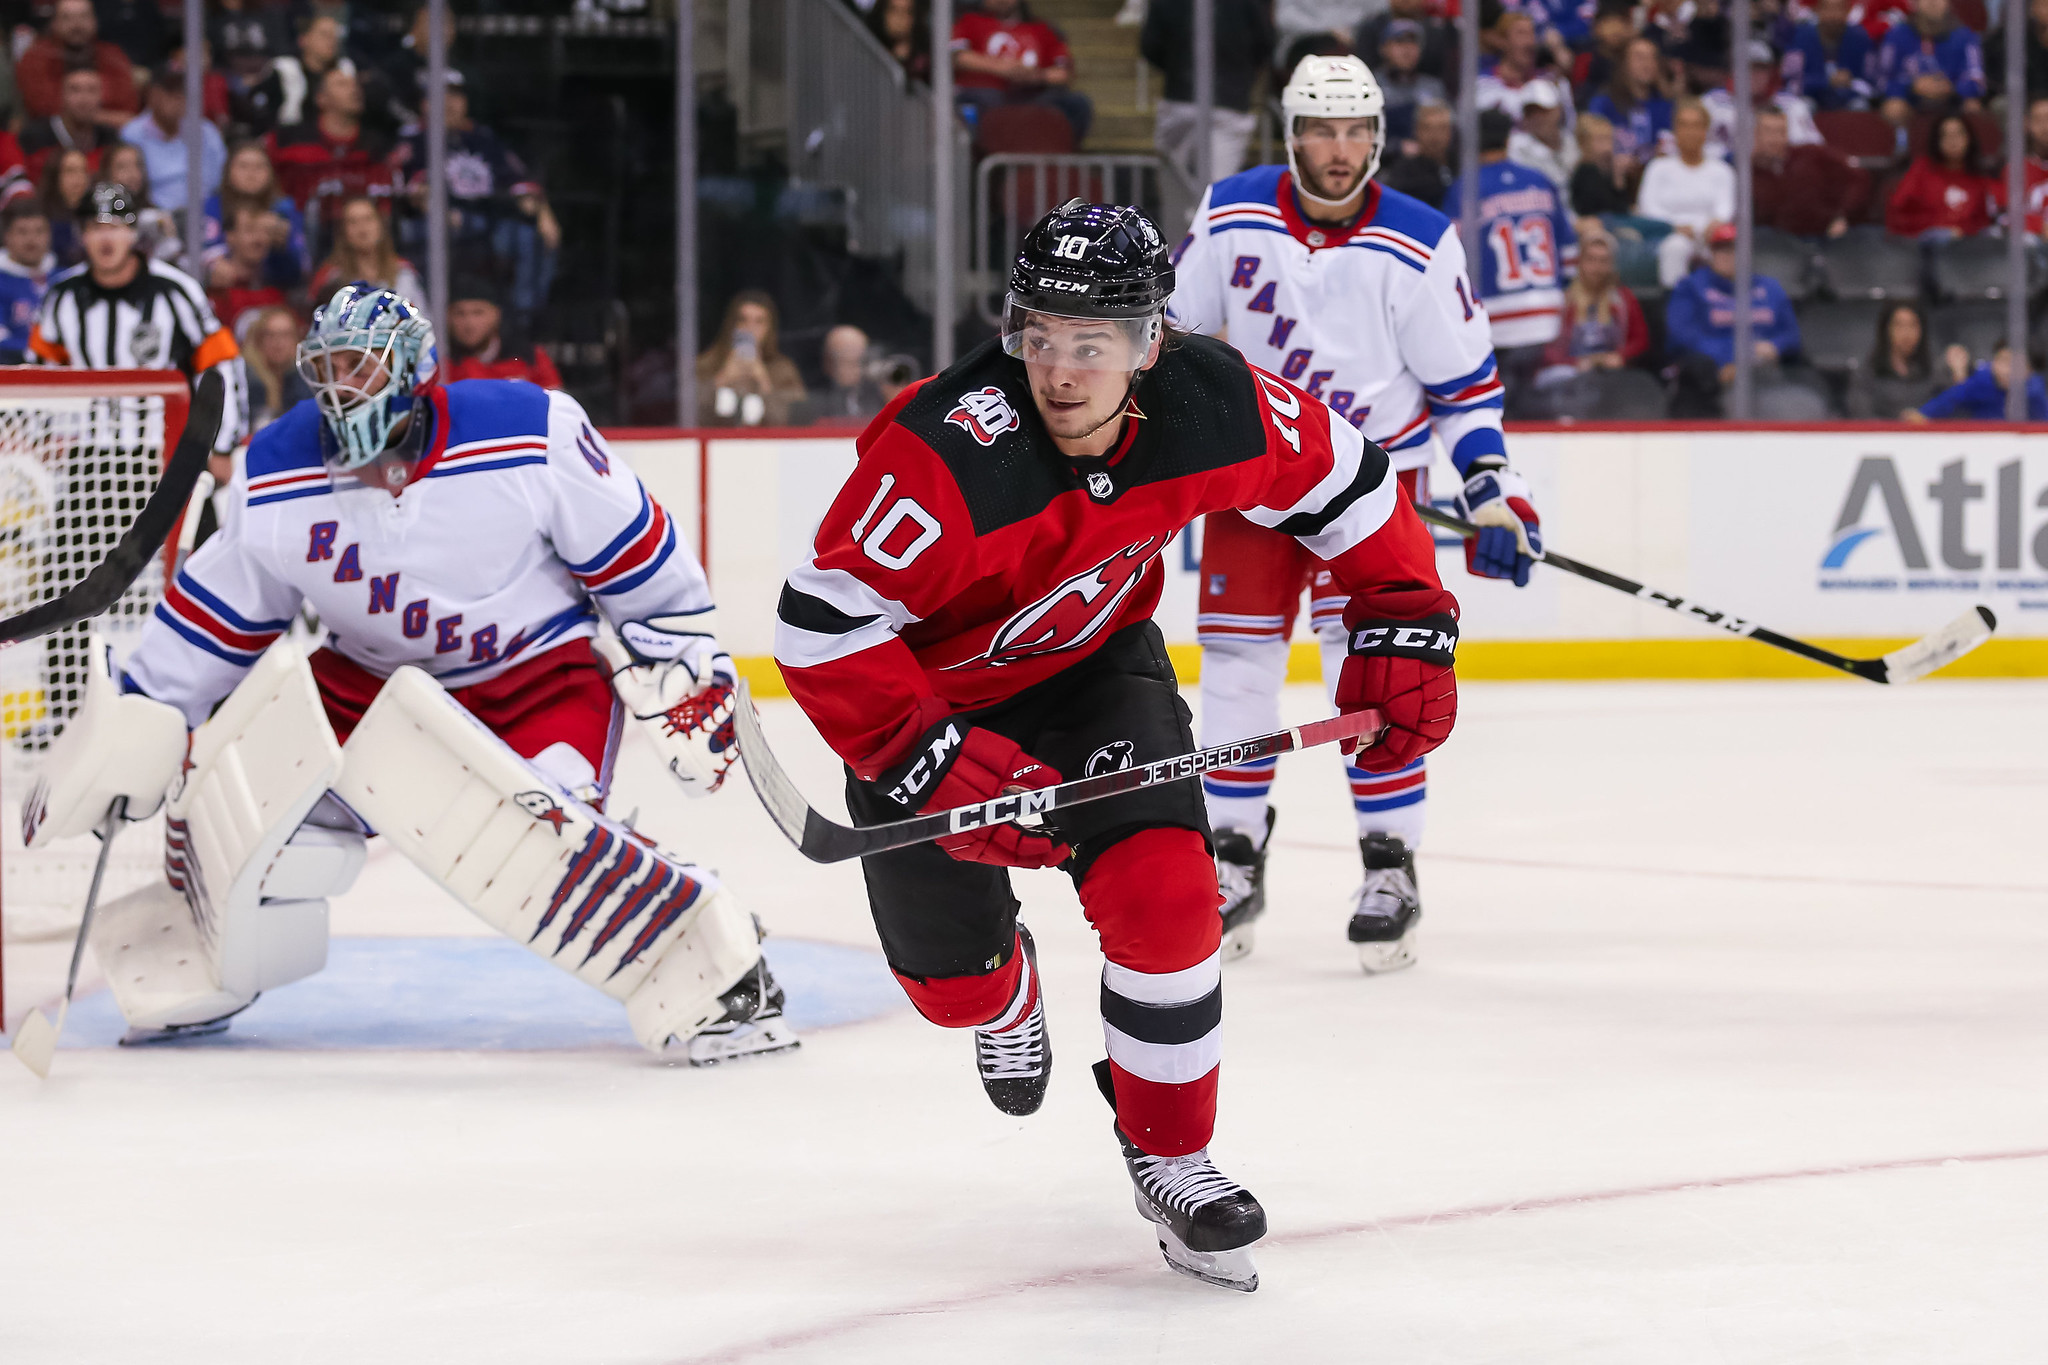 New Jersey Devils Free Agent Miles Wood signs with Colorado Avalanche -  Mile High Hockey